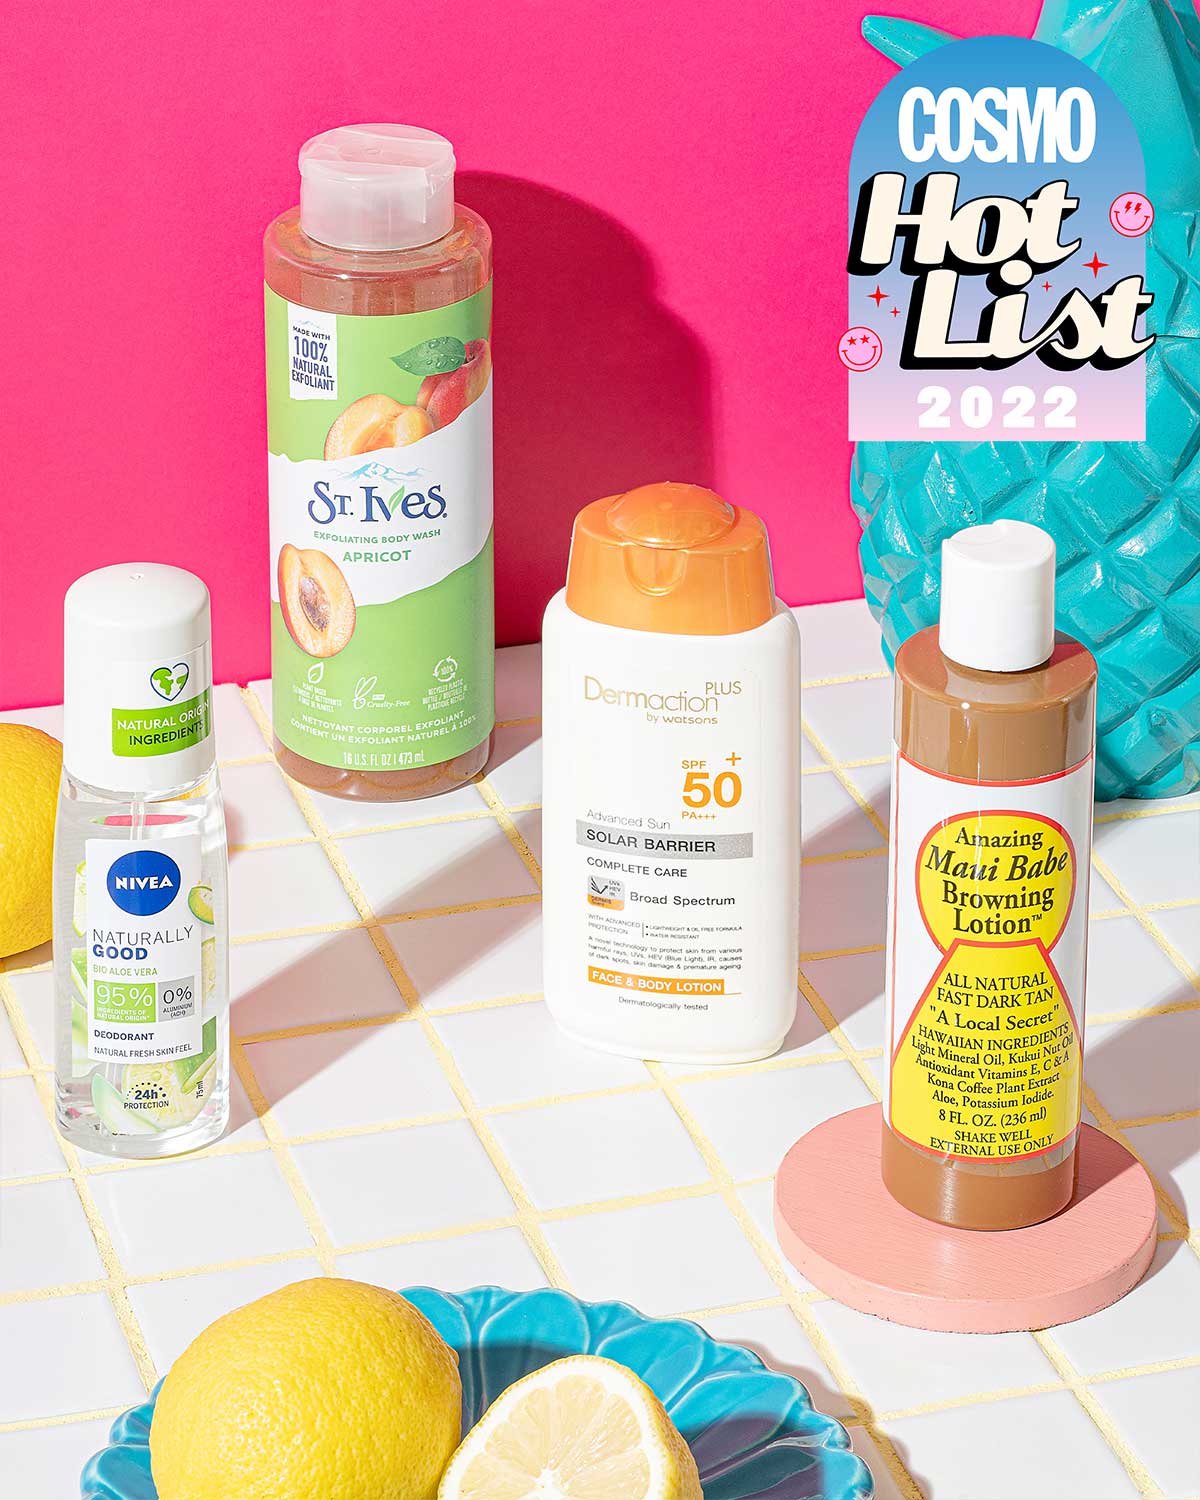 cosmo ph hot list 2022 - best body care products 